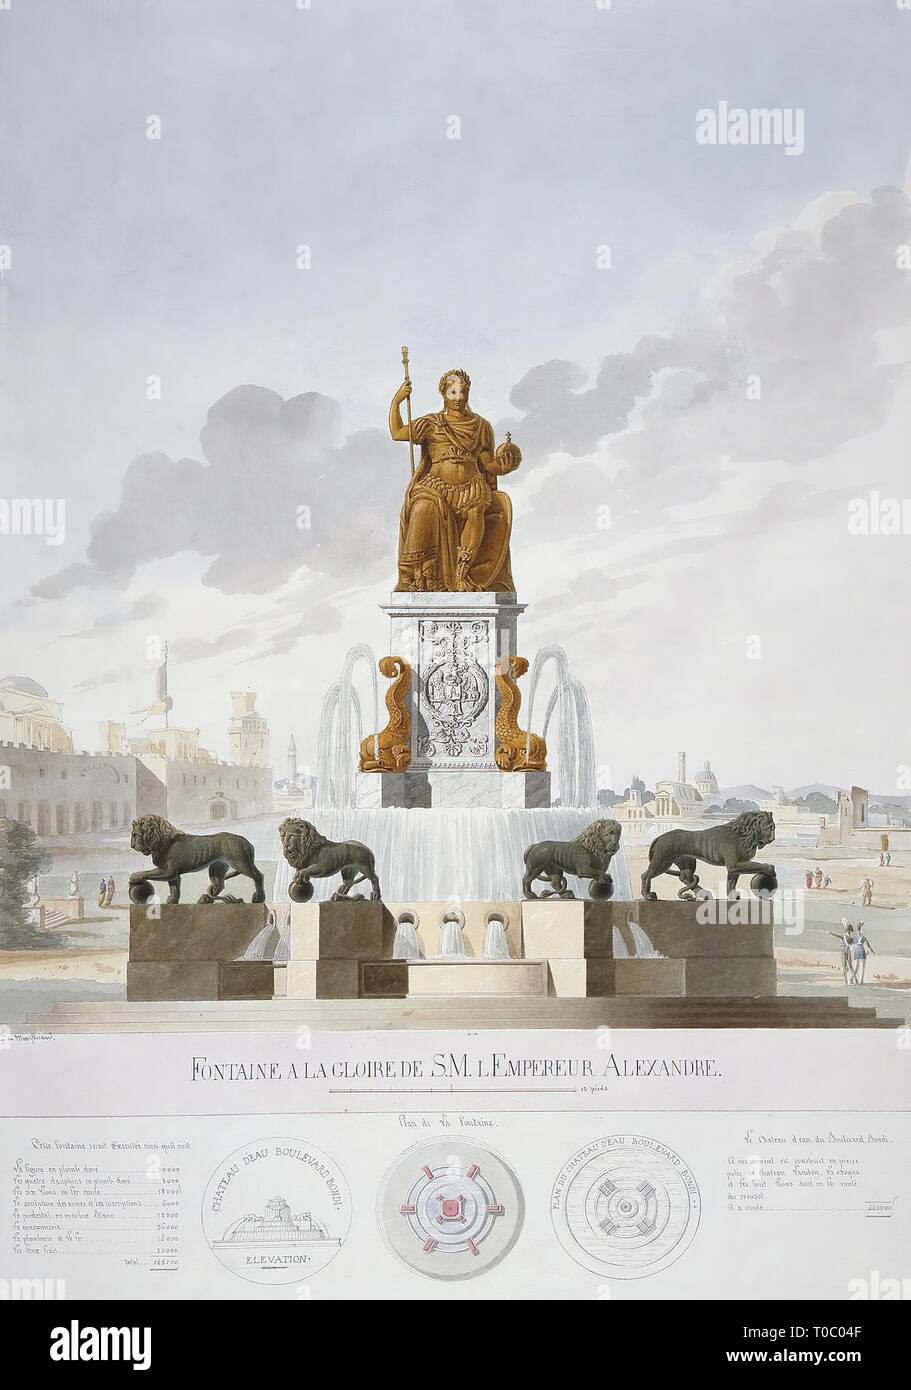 Fountain in Honor of Alexander I'. Album "Different architectural projects  presented by and dedicated to Alexander I by Auguste Montferrand". France,  1814. Dimensions: 71x50,6 cm. Museum: State Hermitage, St. Petersburg.  Author: August